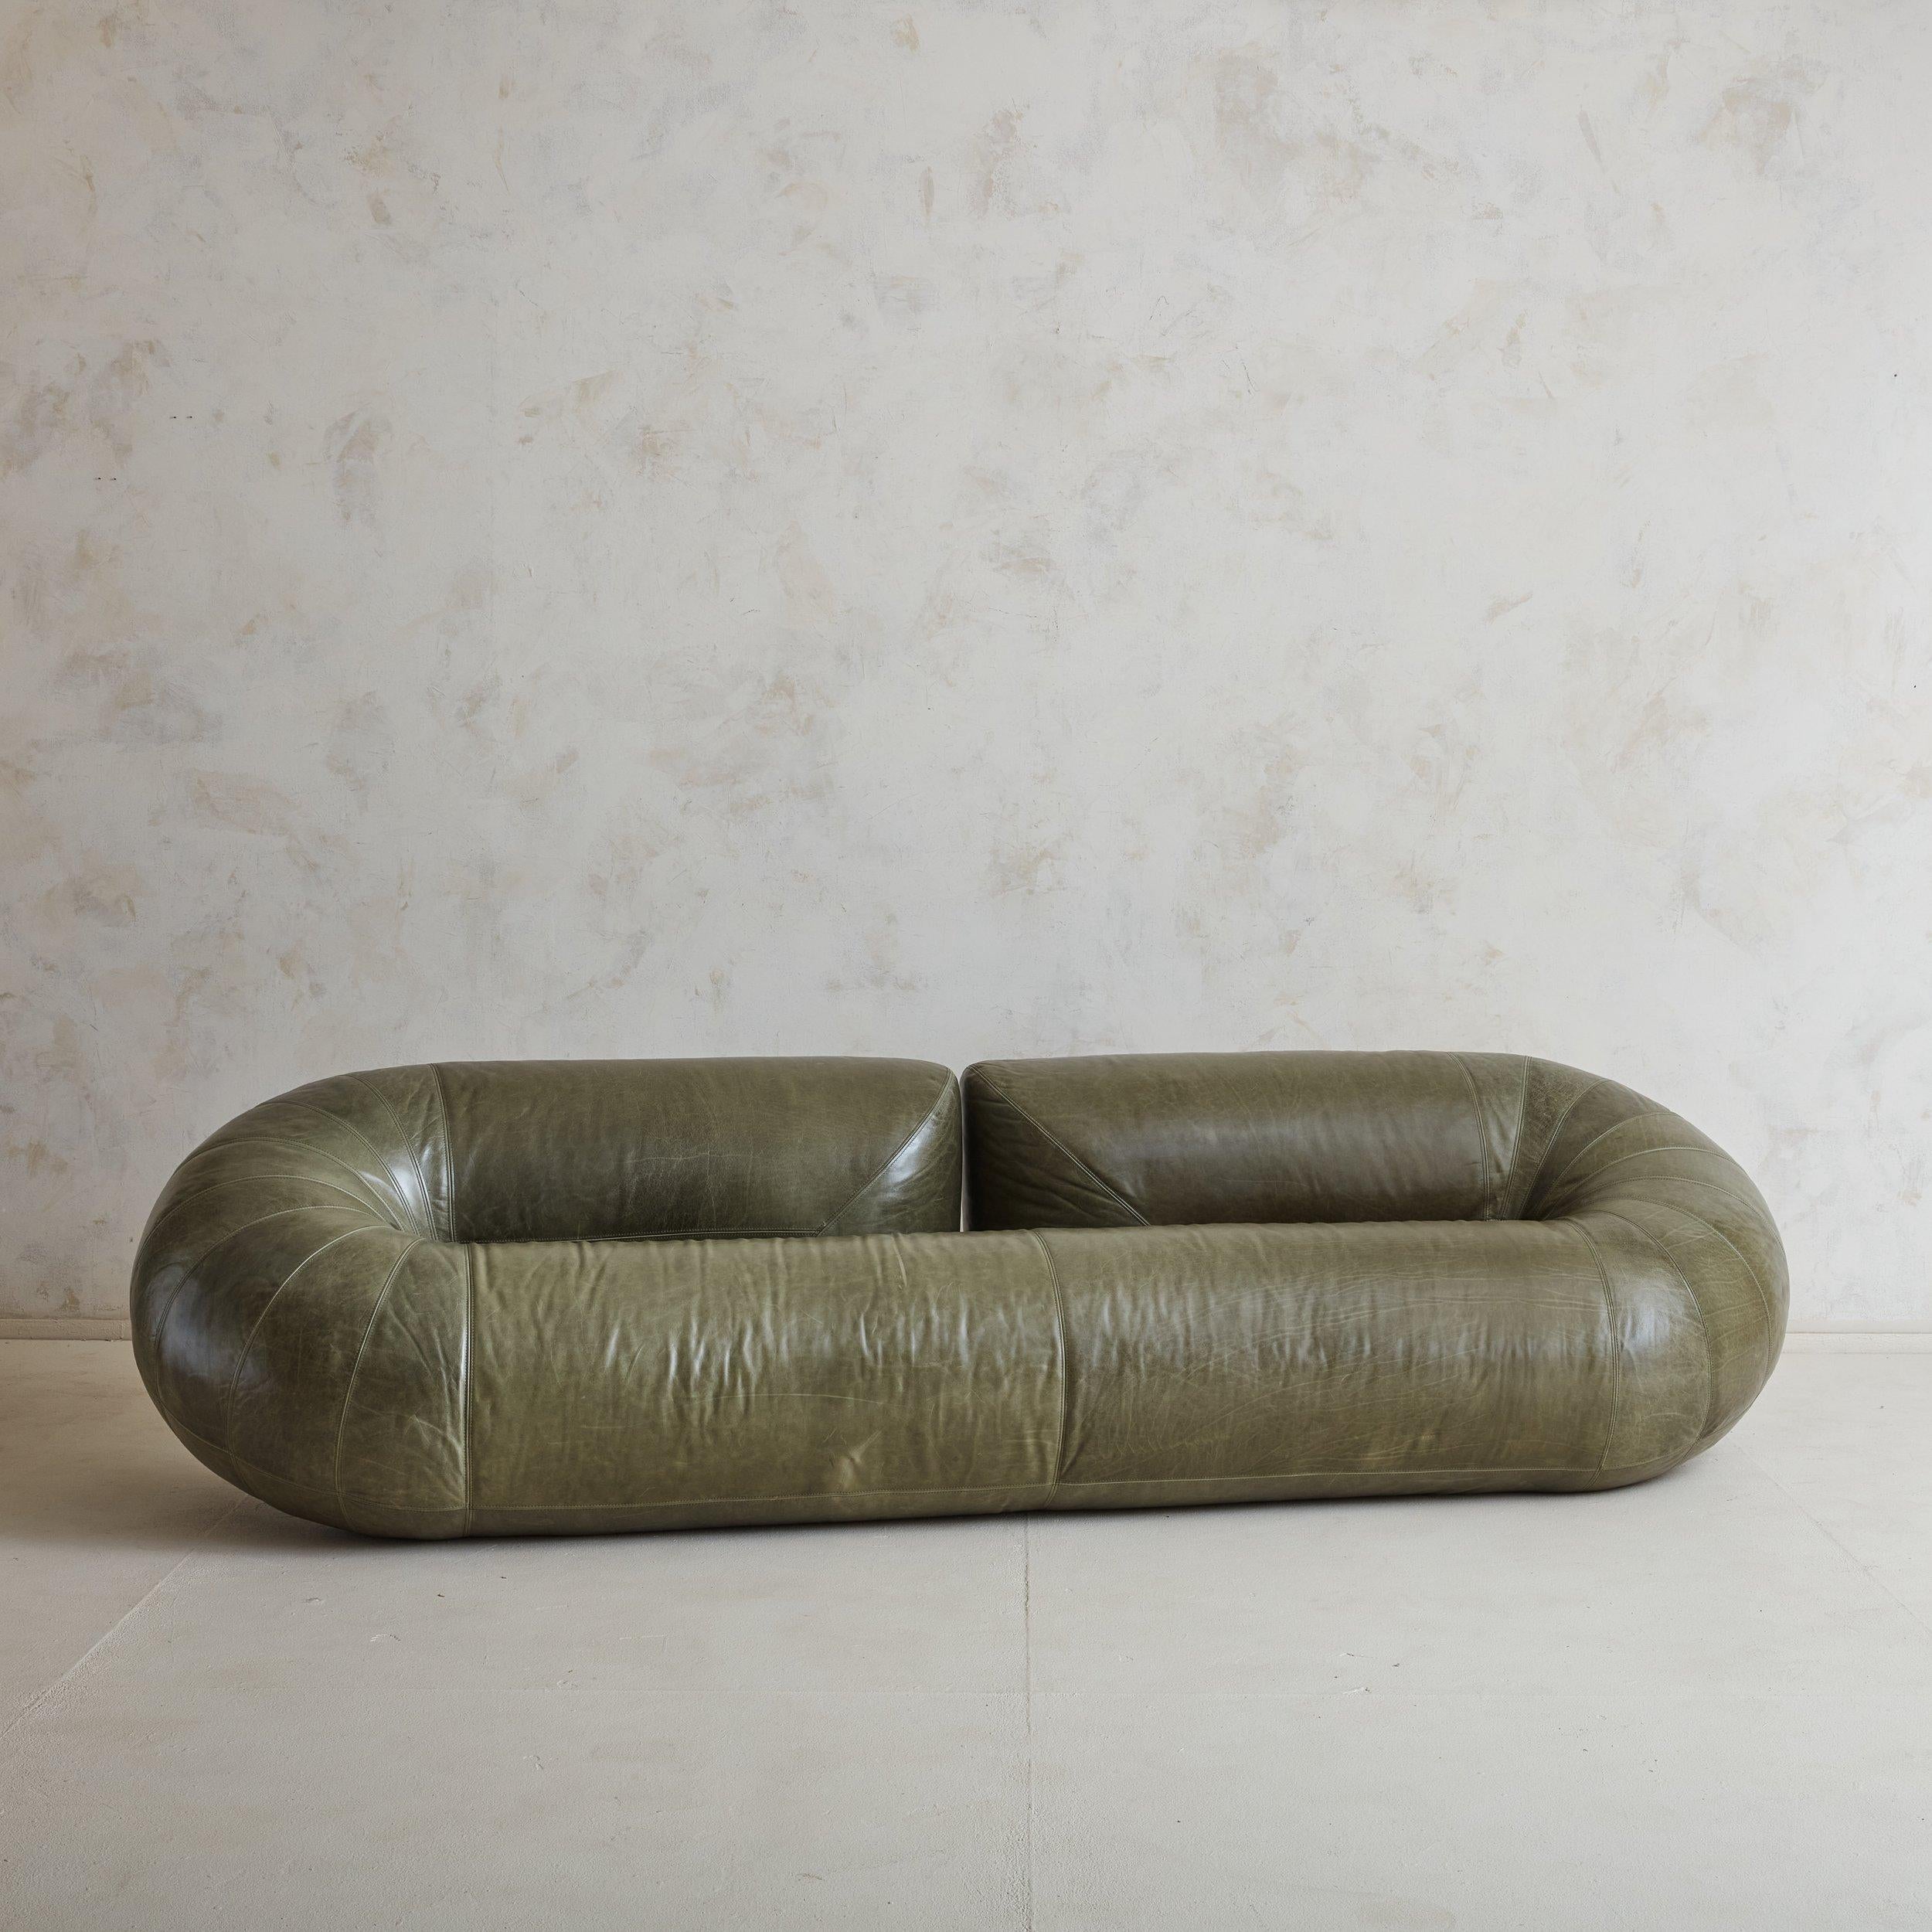 Belgian Space Age 'Zeppelin' Sofa in Olive Green Leather by Walter Leeman for Velda For Sale